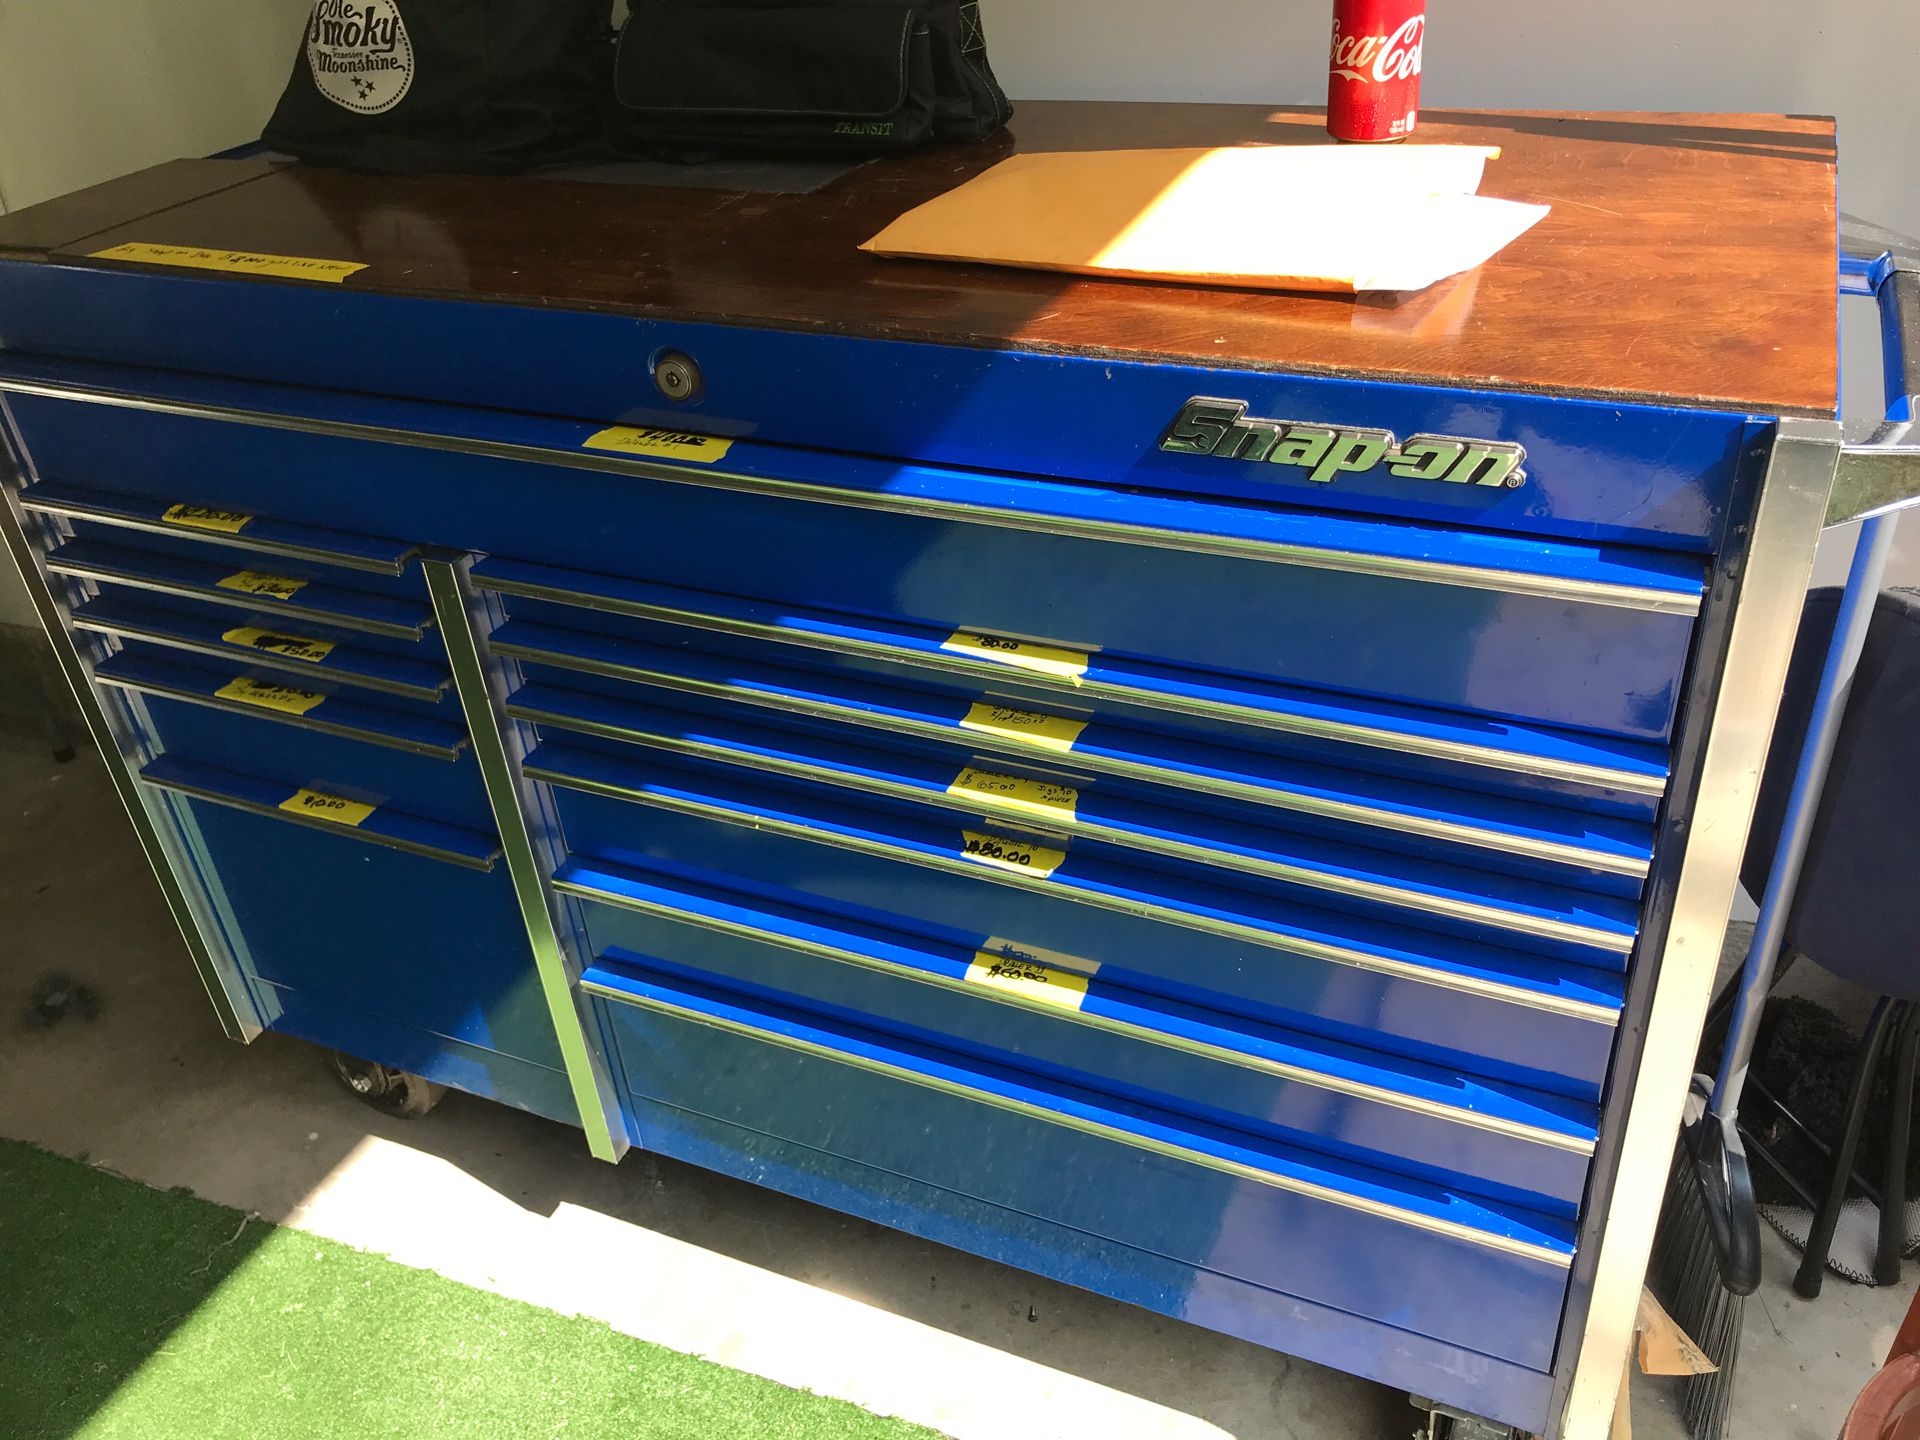 Snap on Tool box It’s Dimensions Is 54 Long